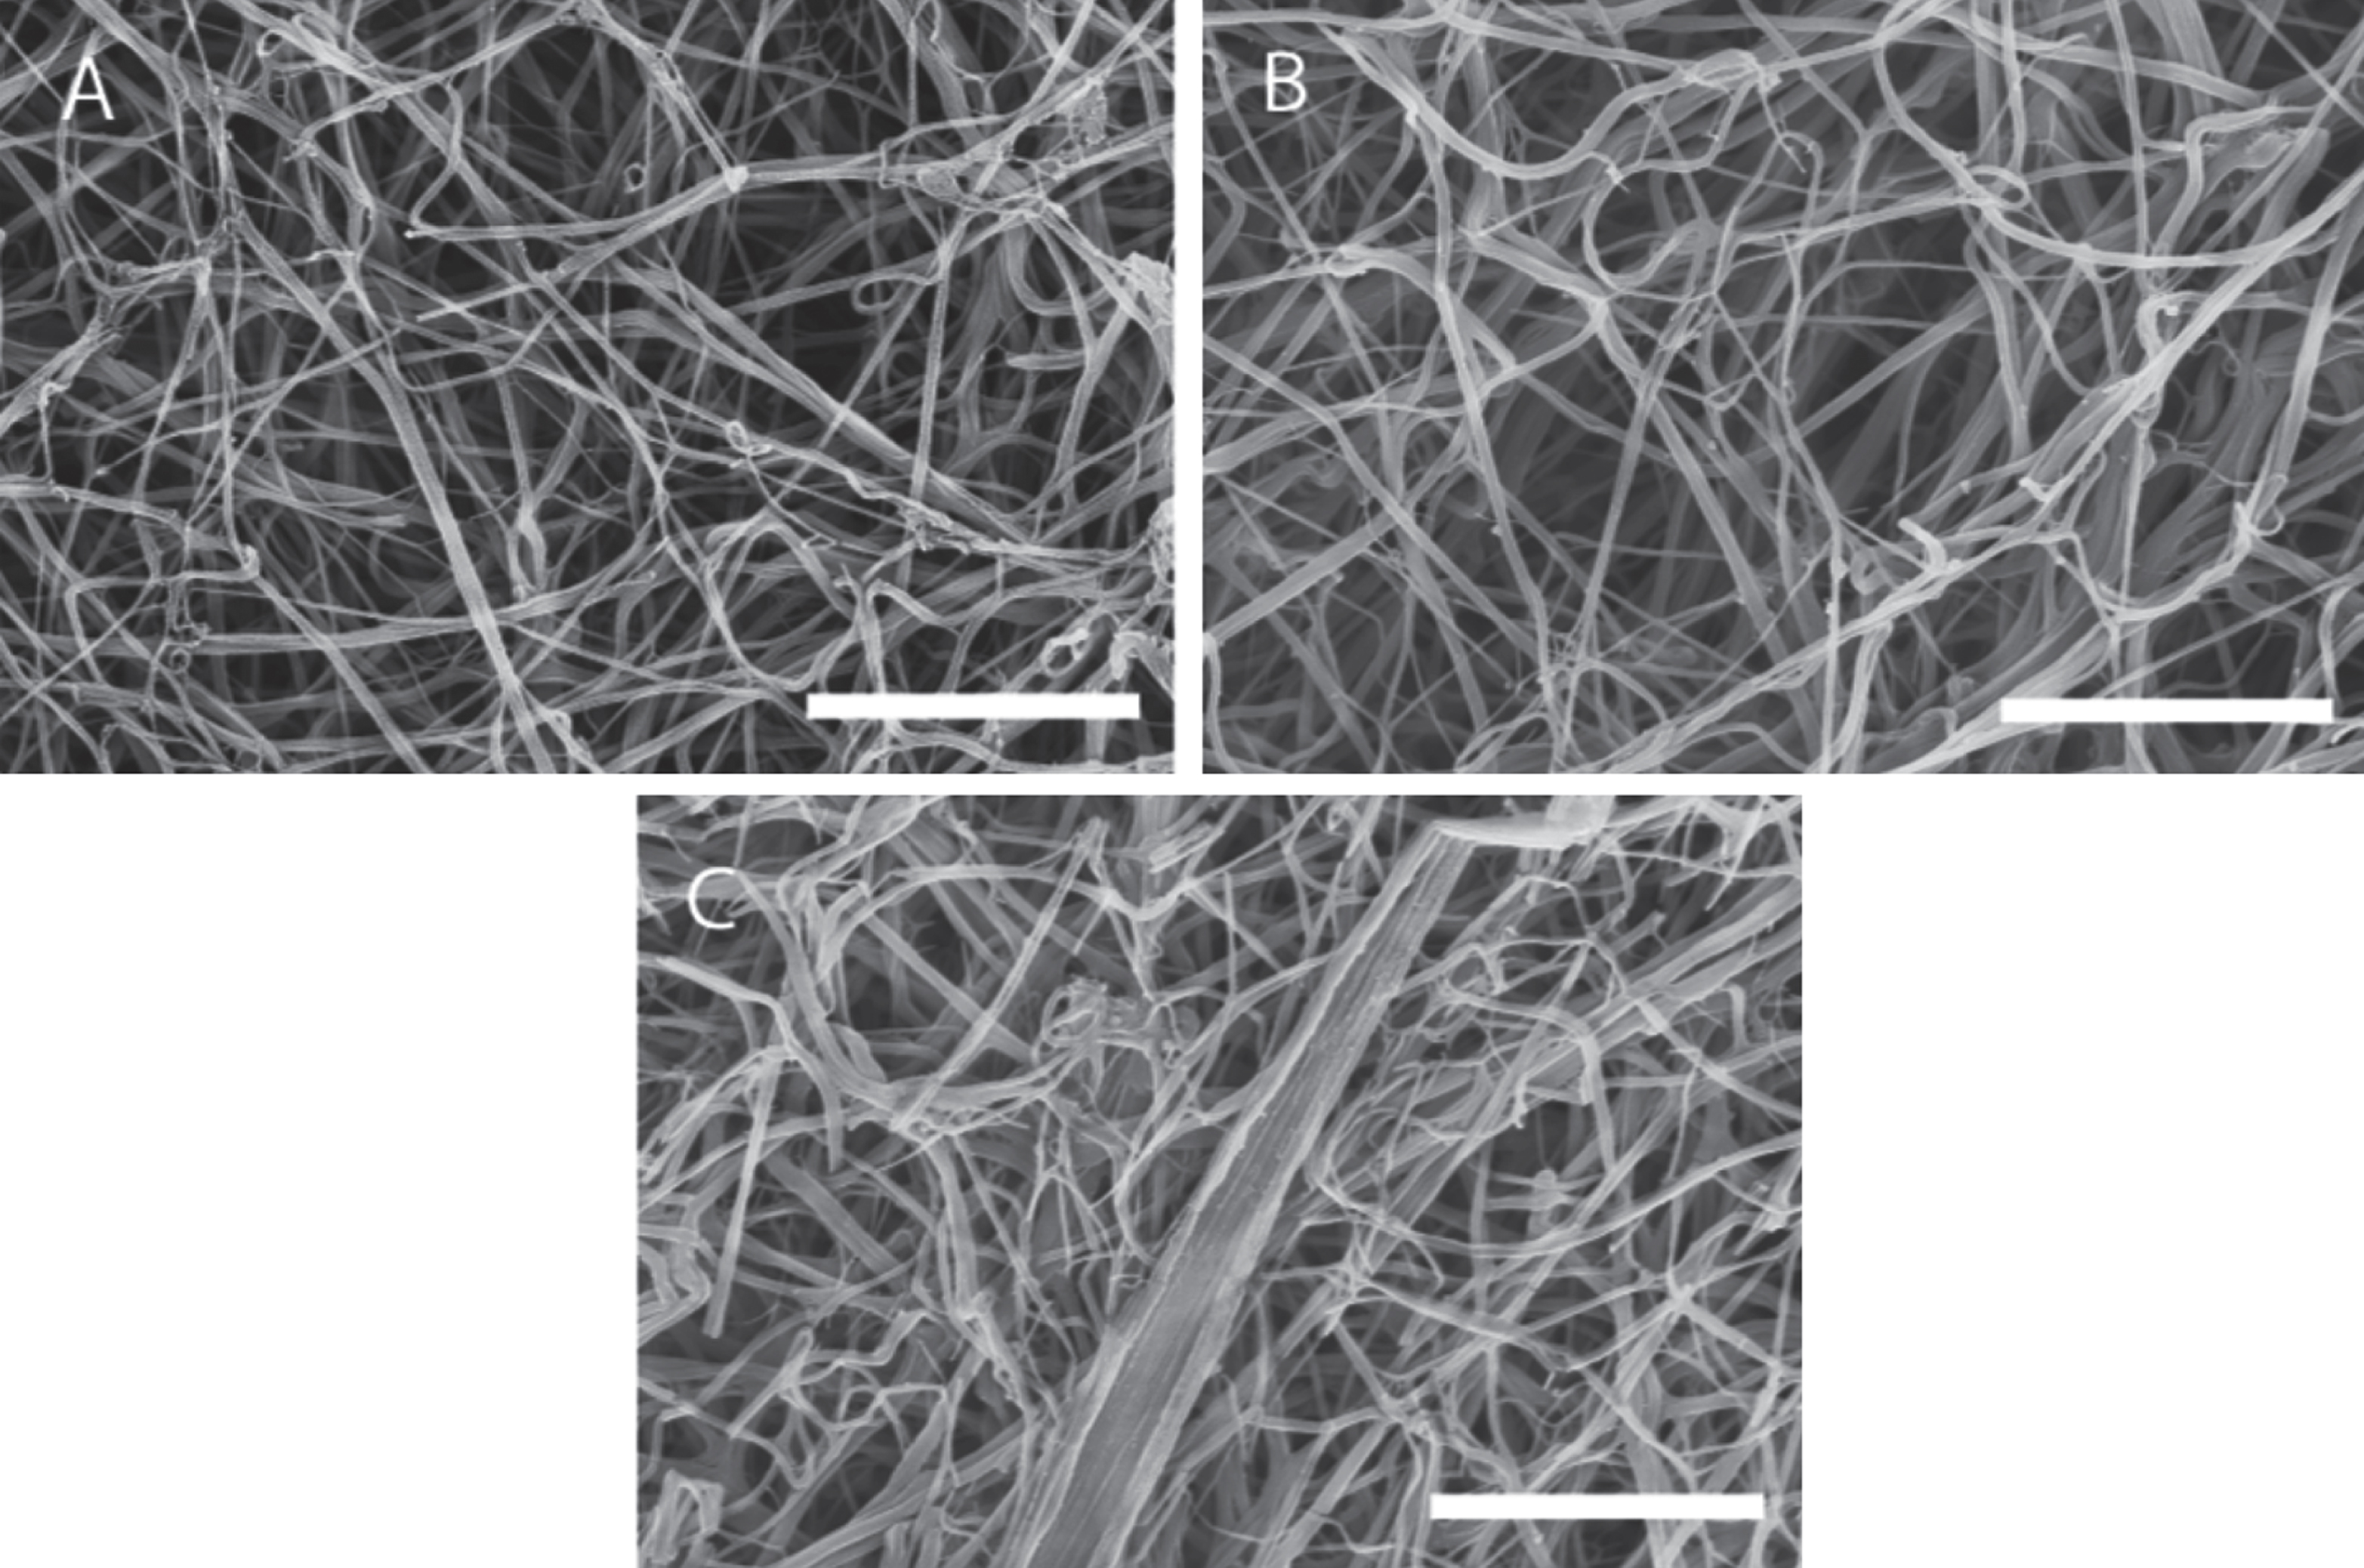 SEM images of a fibrin gel formed under SAOS and those formed under CSPS at different levels of shear stress. Fibrin gel network formed under (A) SAOS (σs= 0 Pa), (B) CSPS (σs= 0.1 Pa) and (C) CSPS (σs= 0.35 Pa) with the corresponding values of df being 1.99 (± 0.01), 2.03 (± 0.01) and 2.3 (± 0.05), respectively. The scale bar width is 5 μm.